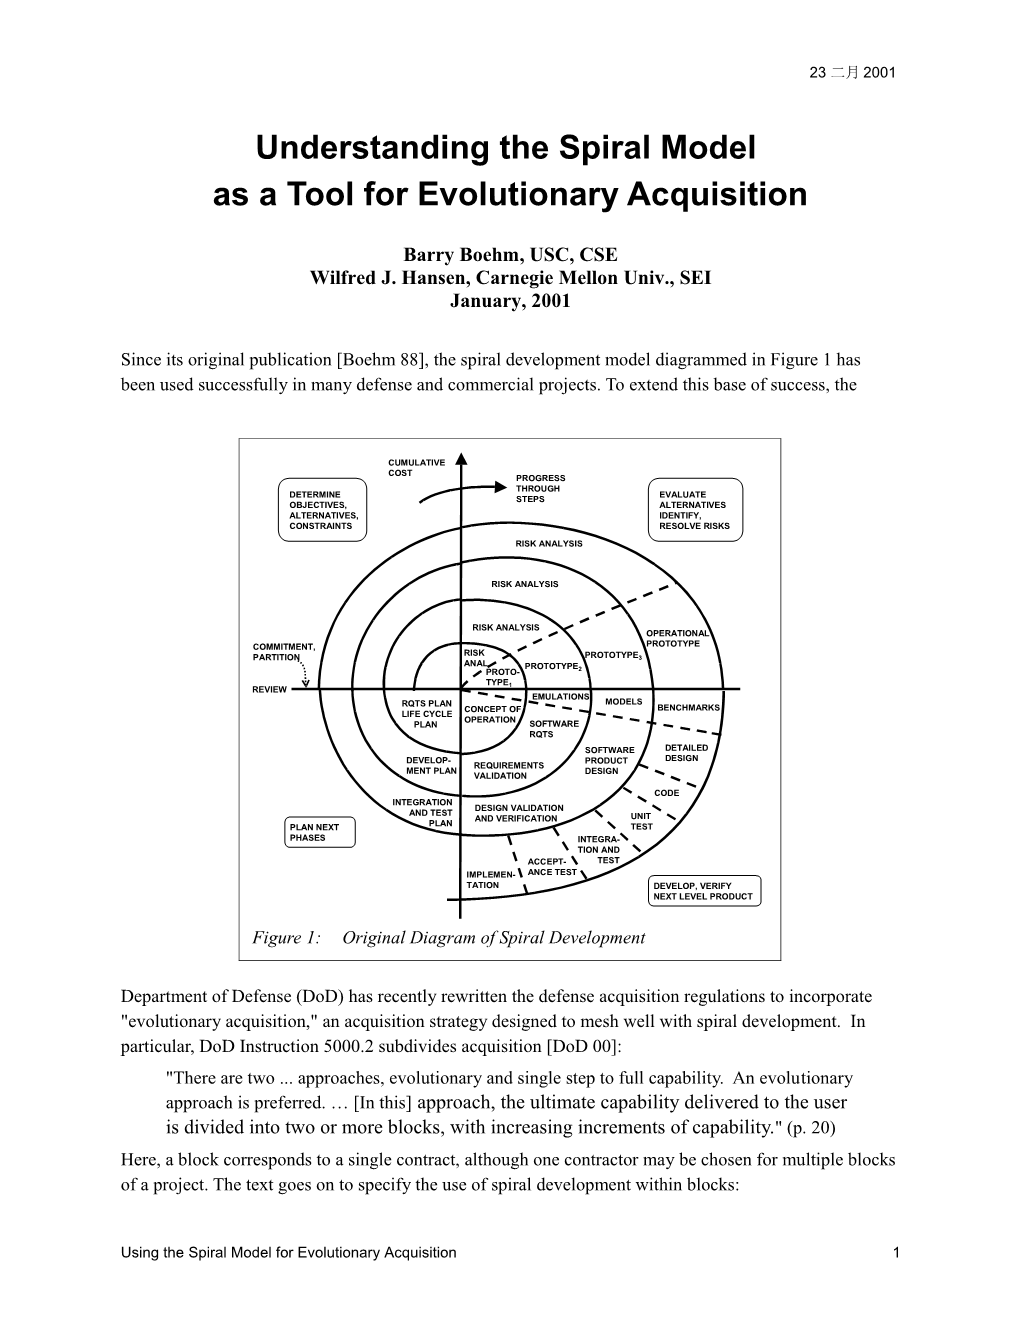 Using the Spiral Model for Evolutionary Acquisition